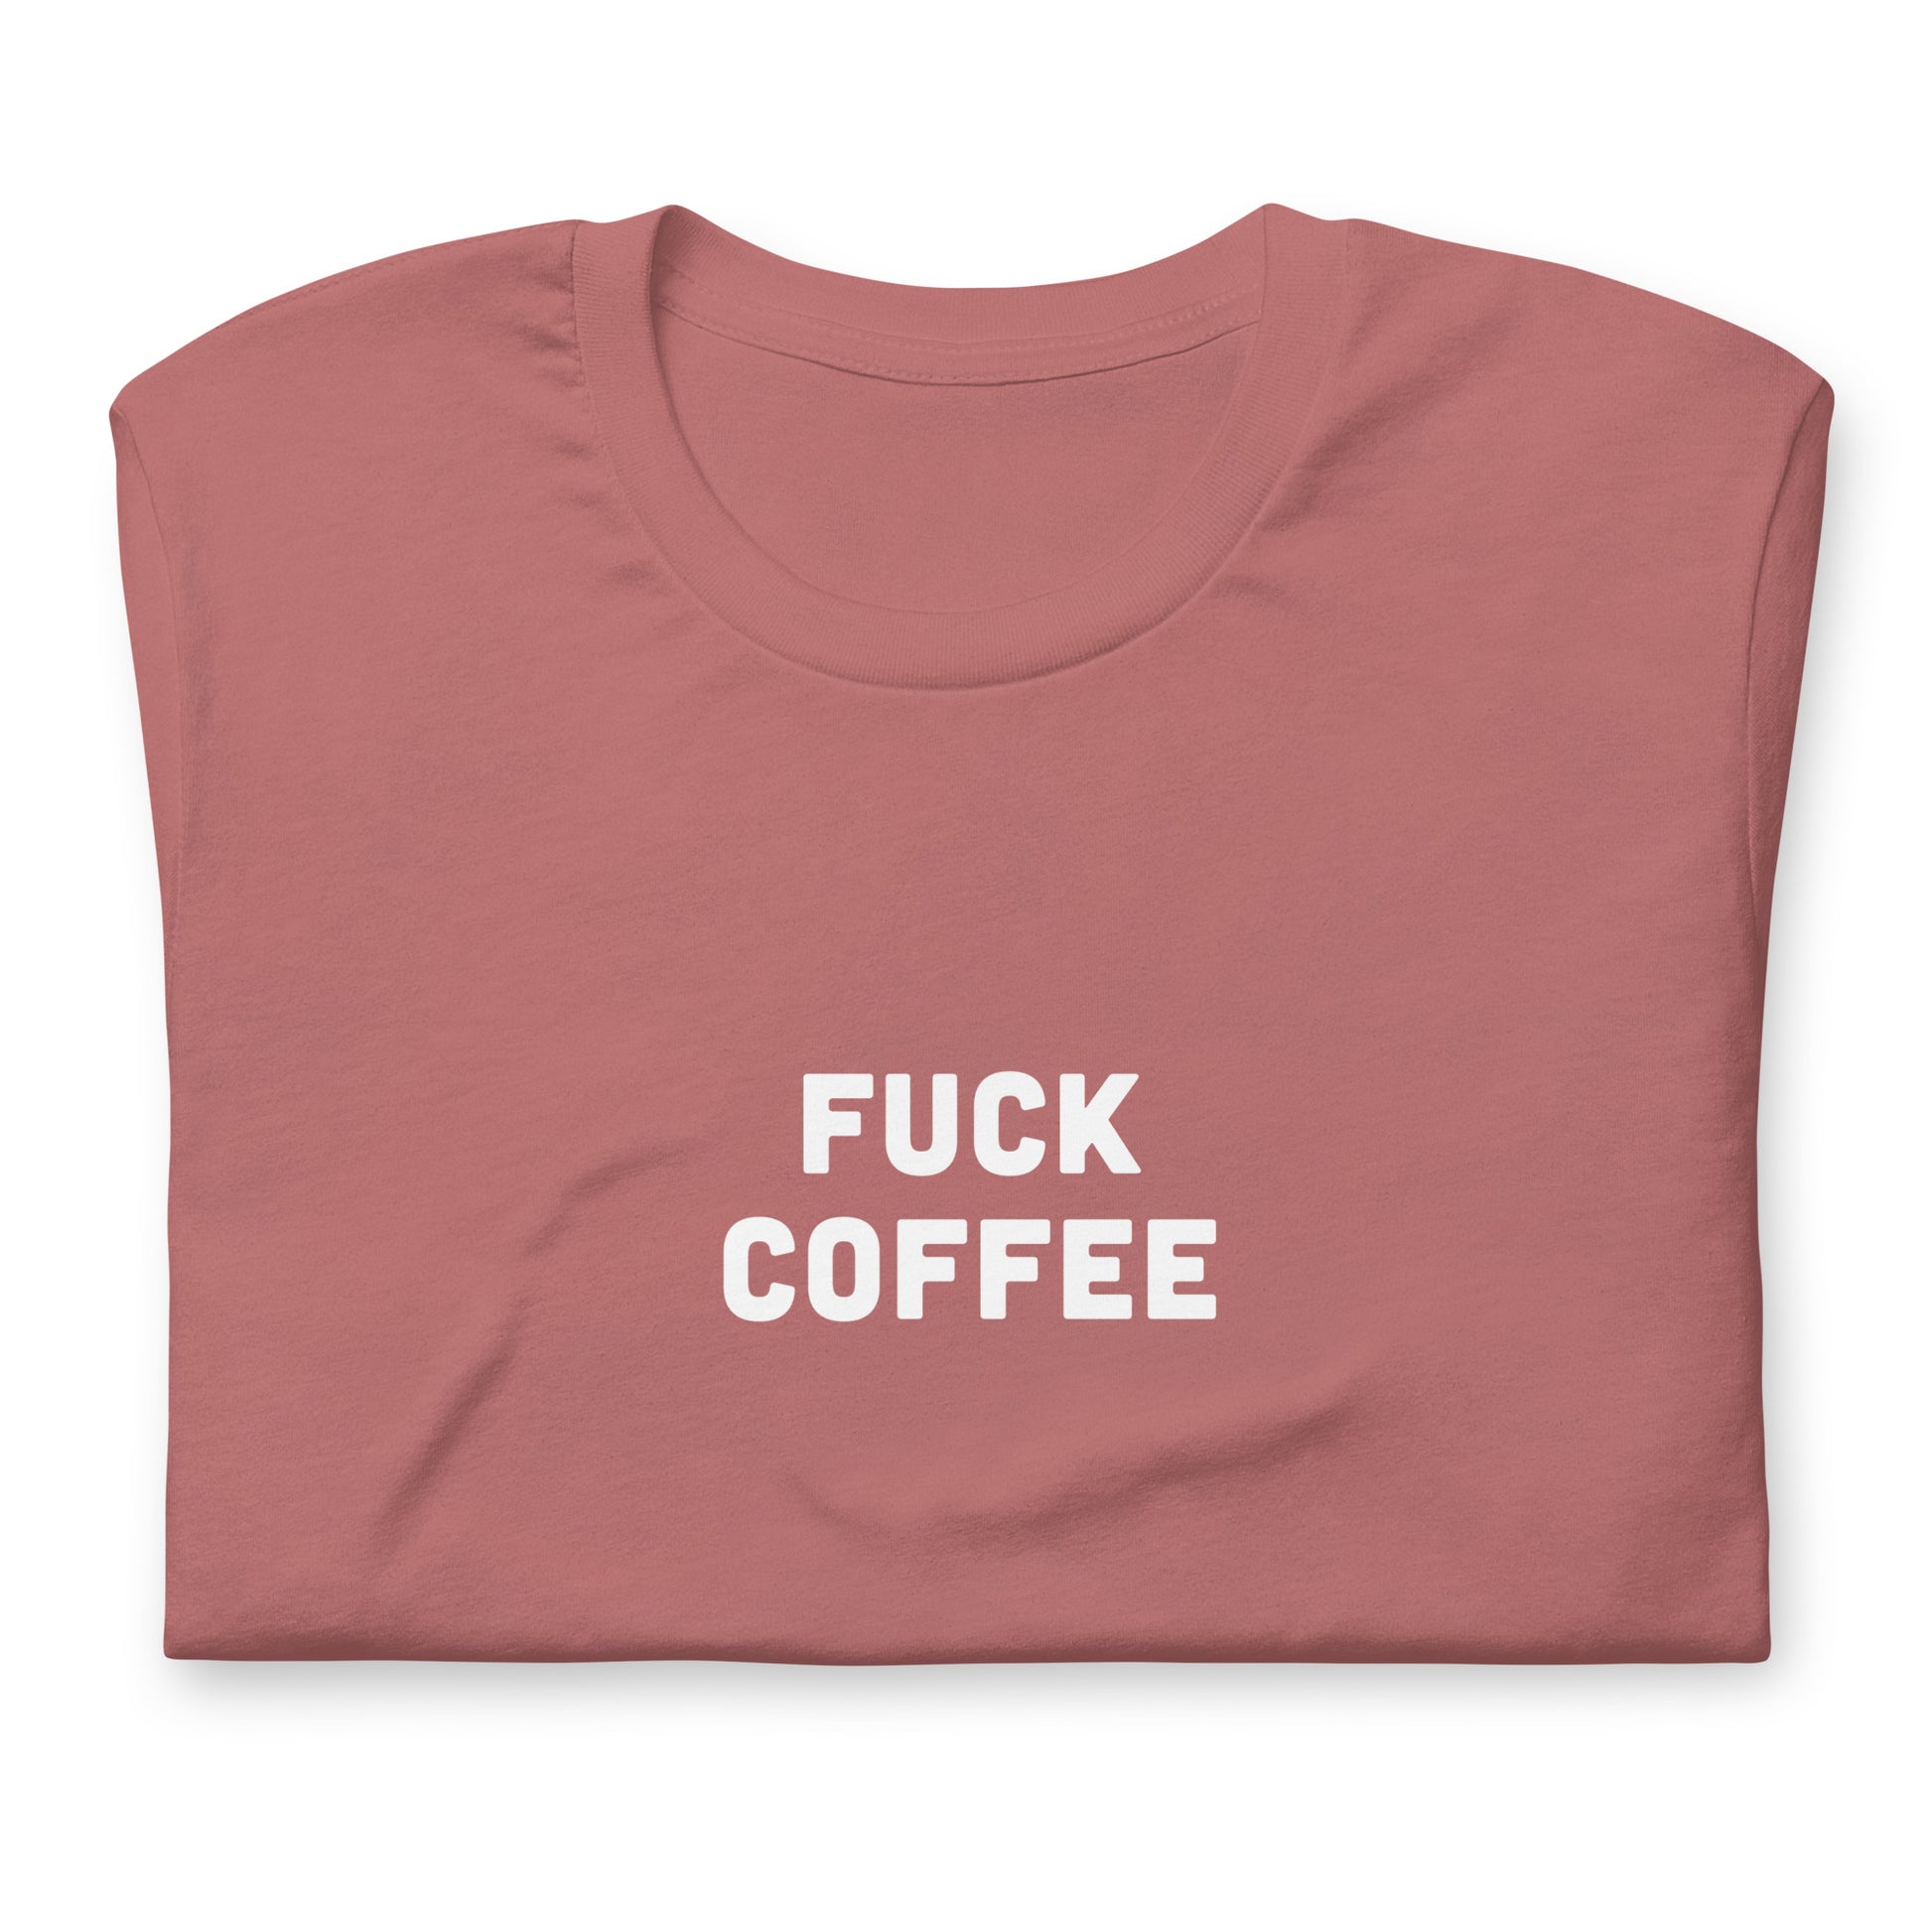 Fuck Coffee T-Shirt Size XL Color Navy